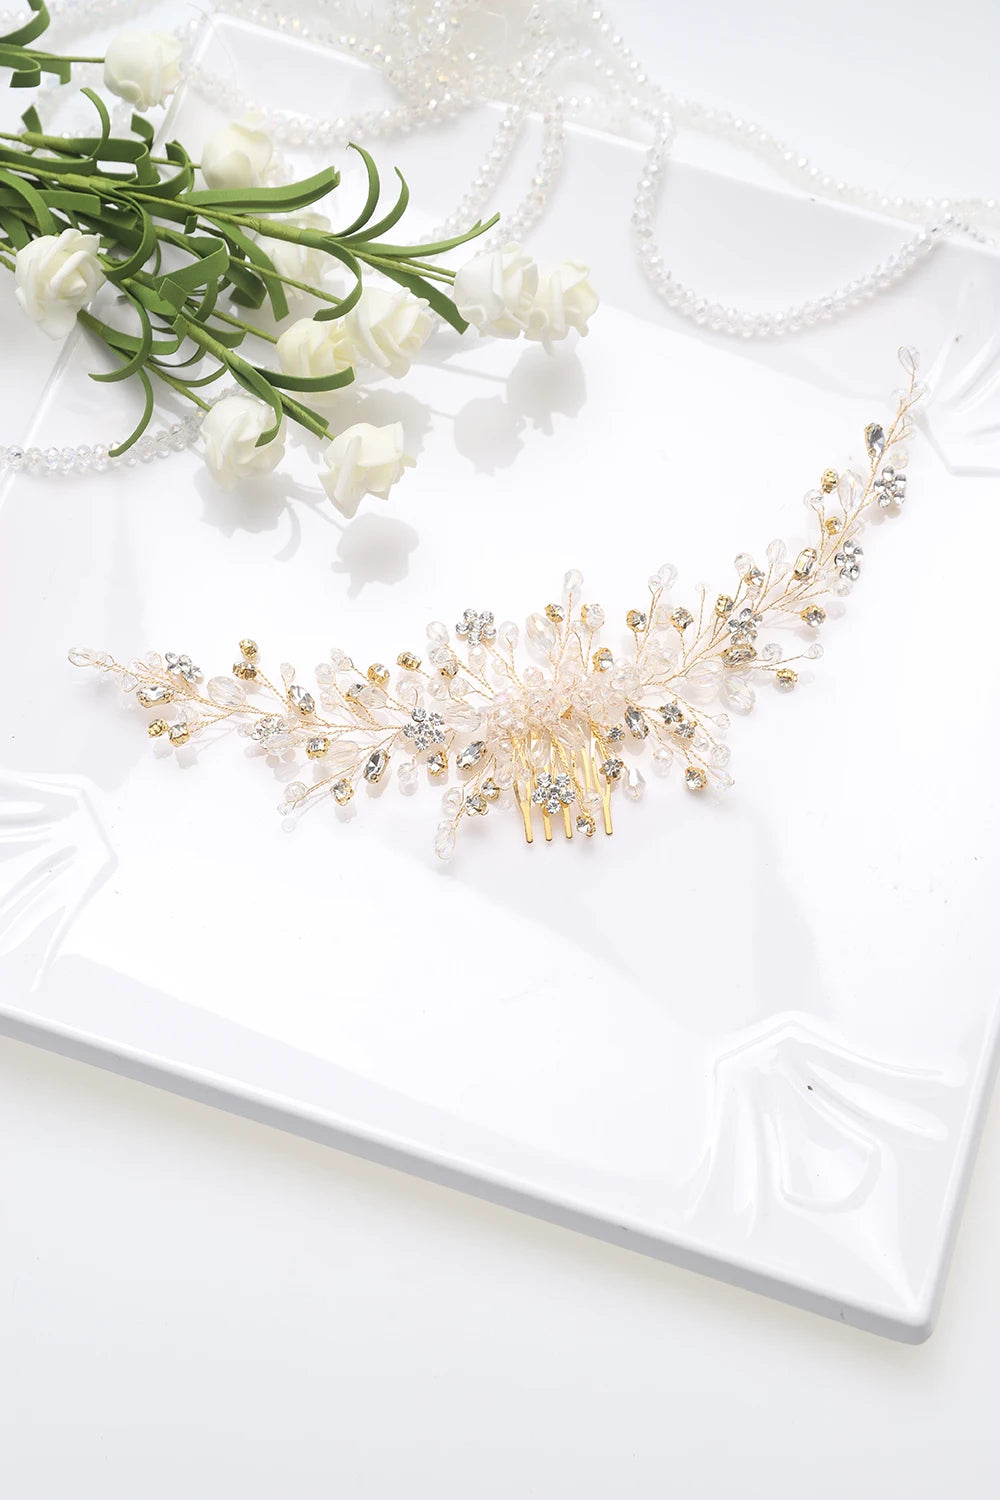 KIMLUD, Vintage Rose gold Silver Wedding Accessories bridal headwear Shiny Crystal Hair comb Elegant banquet for women, China / Gold, KIMLUD Women's Clothes